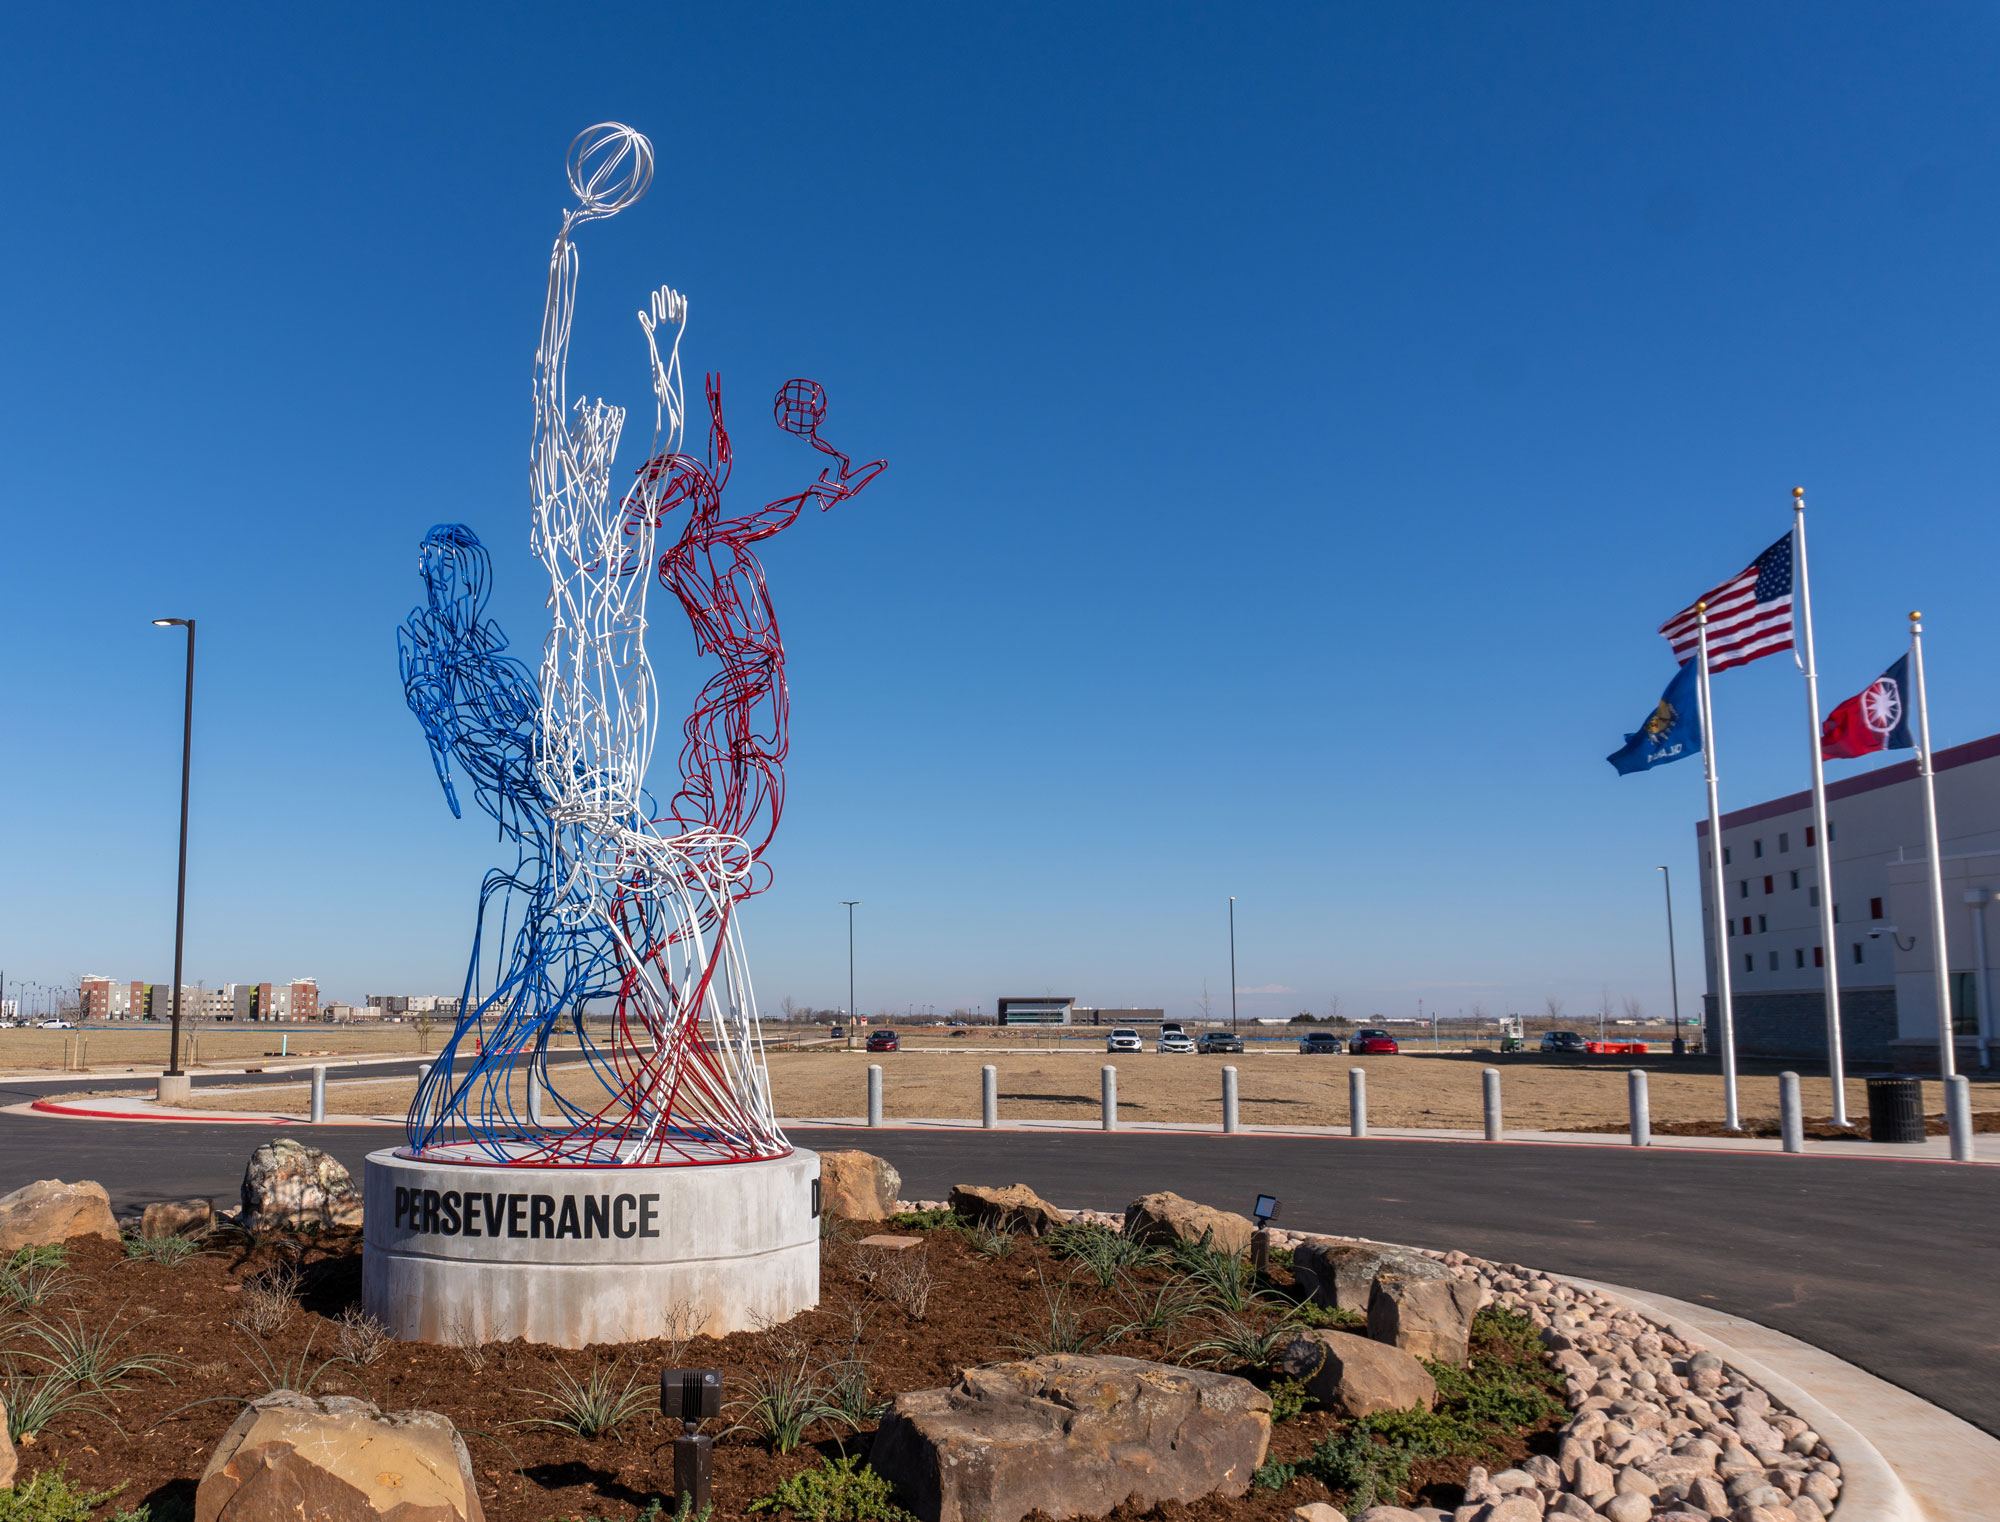 The figures represent the three different sports offered at the center and the color palette reflects the local community of Norman, OK, making this sculpture a unique, site-specific landmark.